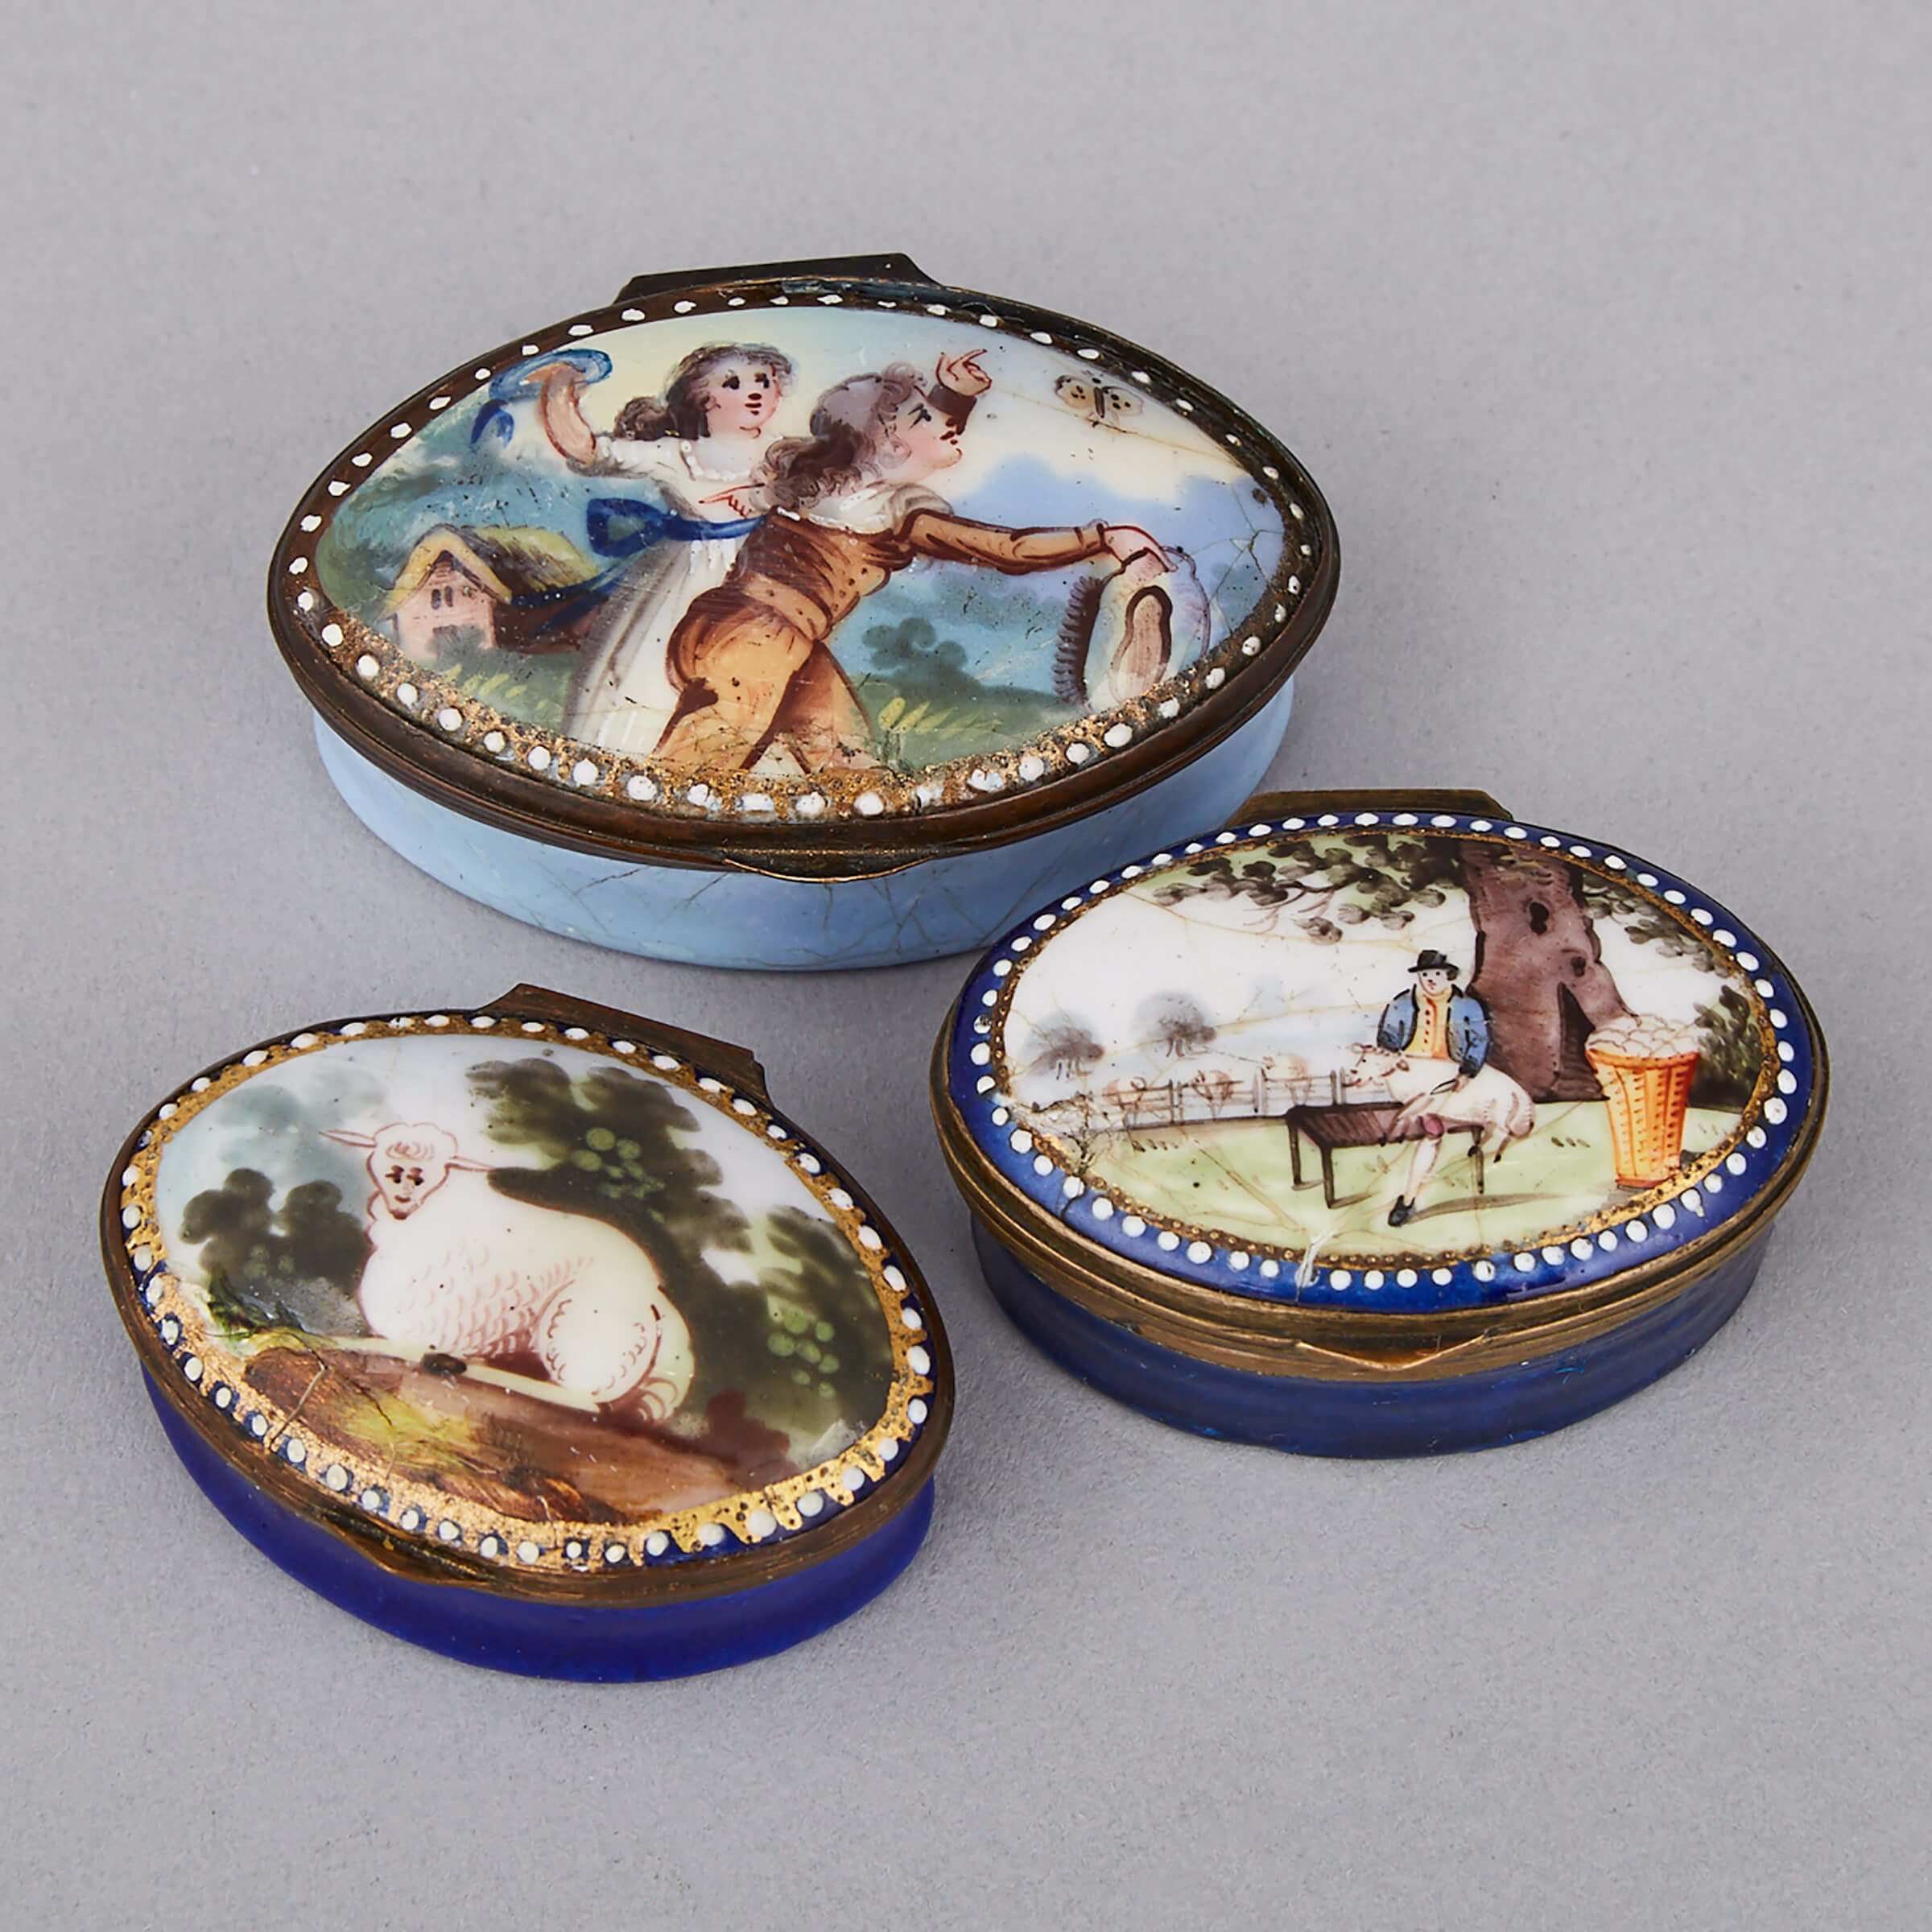 Two Bilston Enamel Snuff Boxes and a Patch Box, late 18th/early 19th century